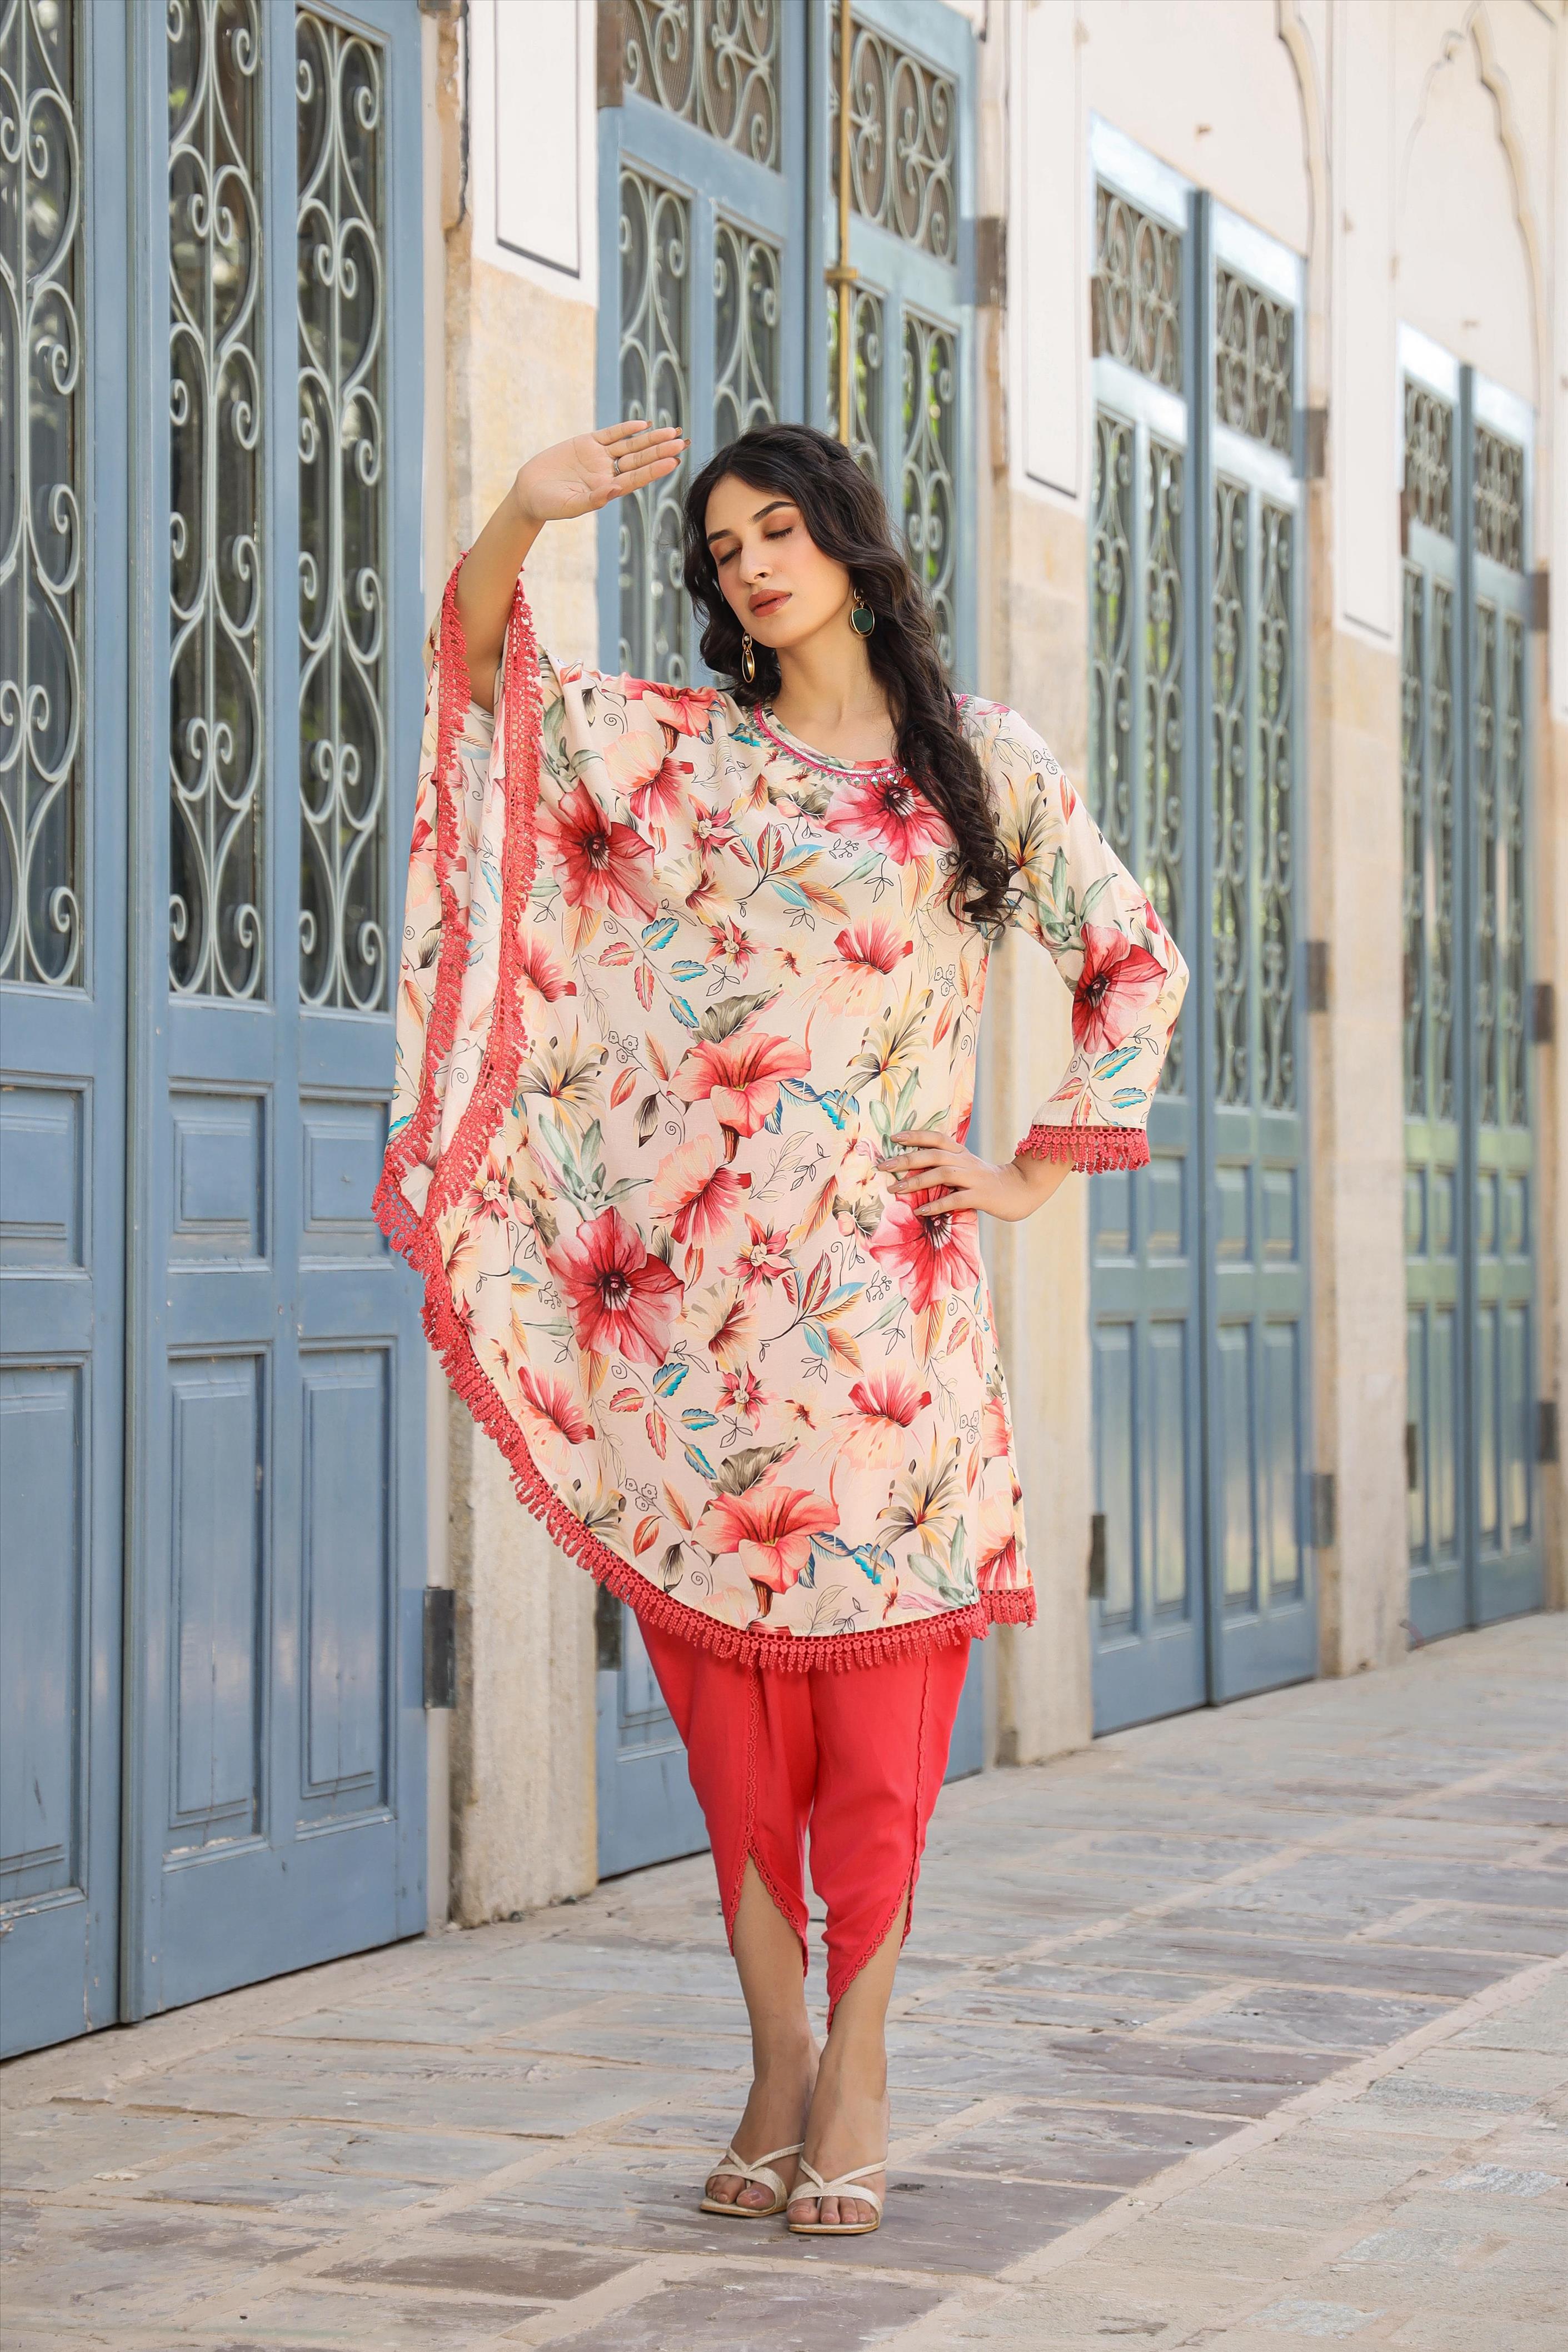 Offwhite Muslin Printed Fusion Poncho With Dhoti Clothing Set